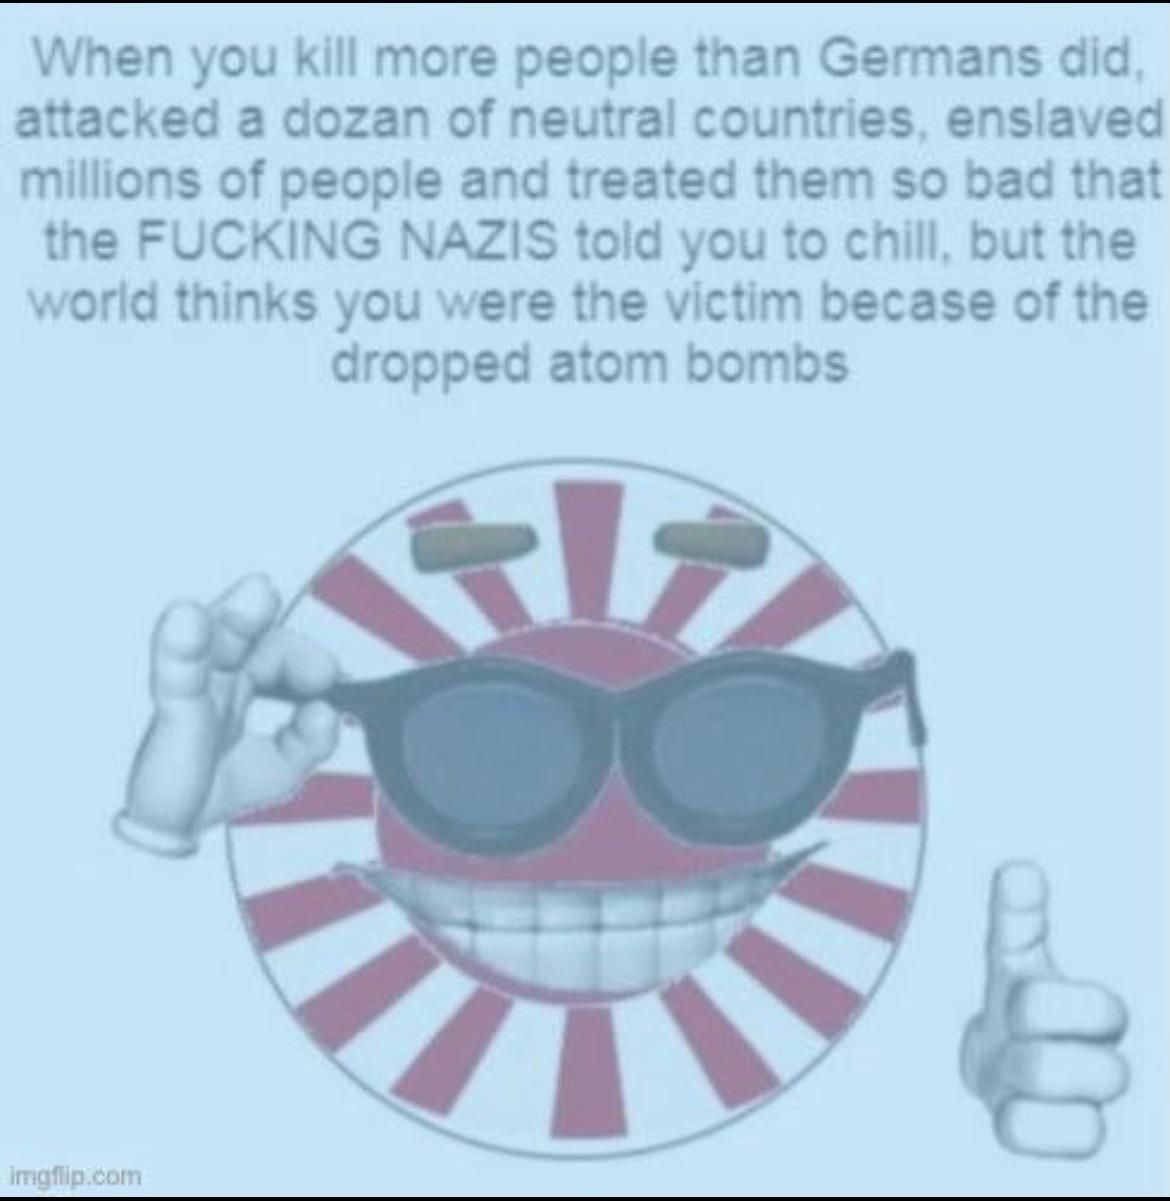 Not to mention all the war crimes